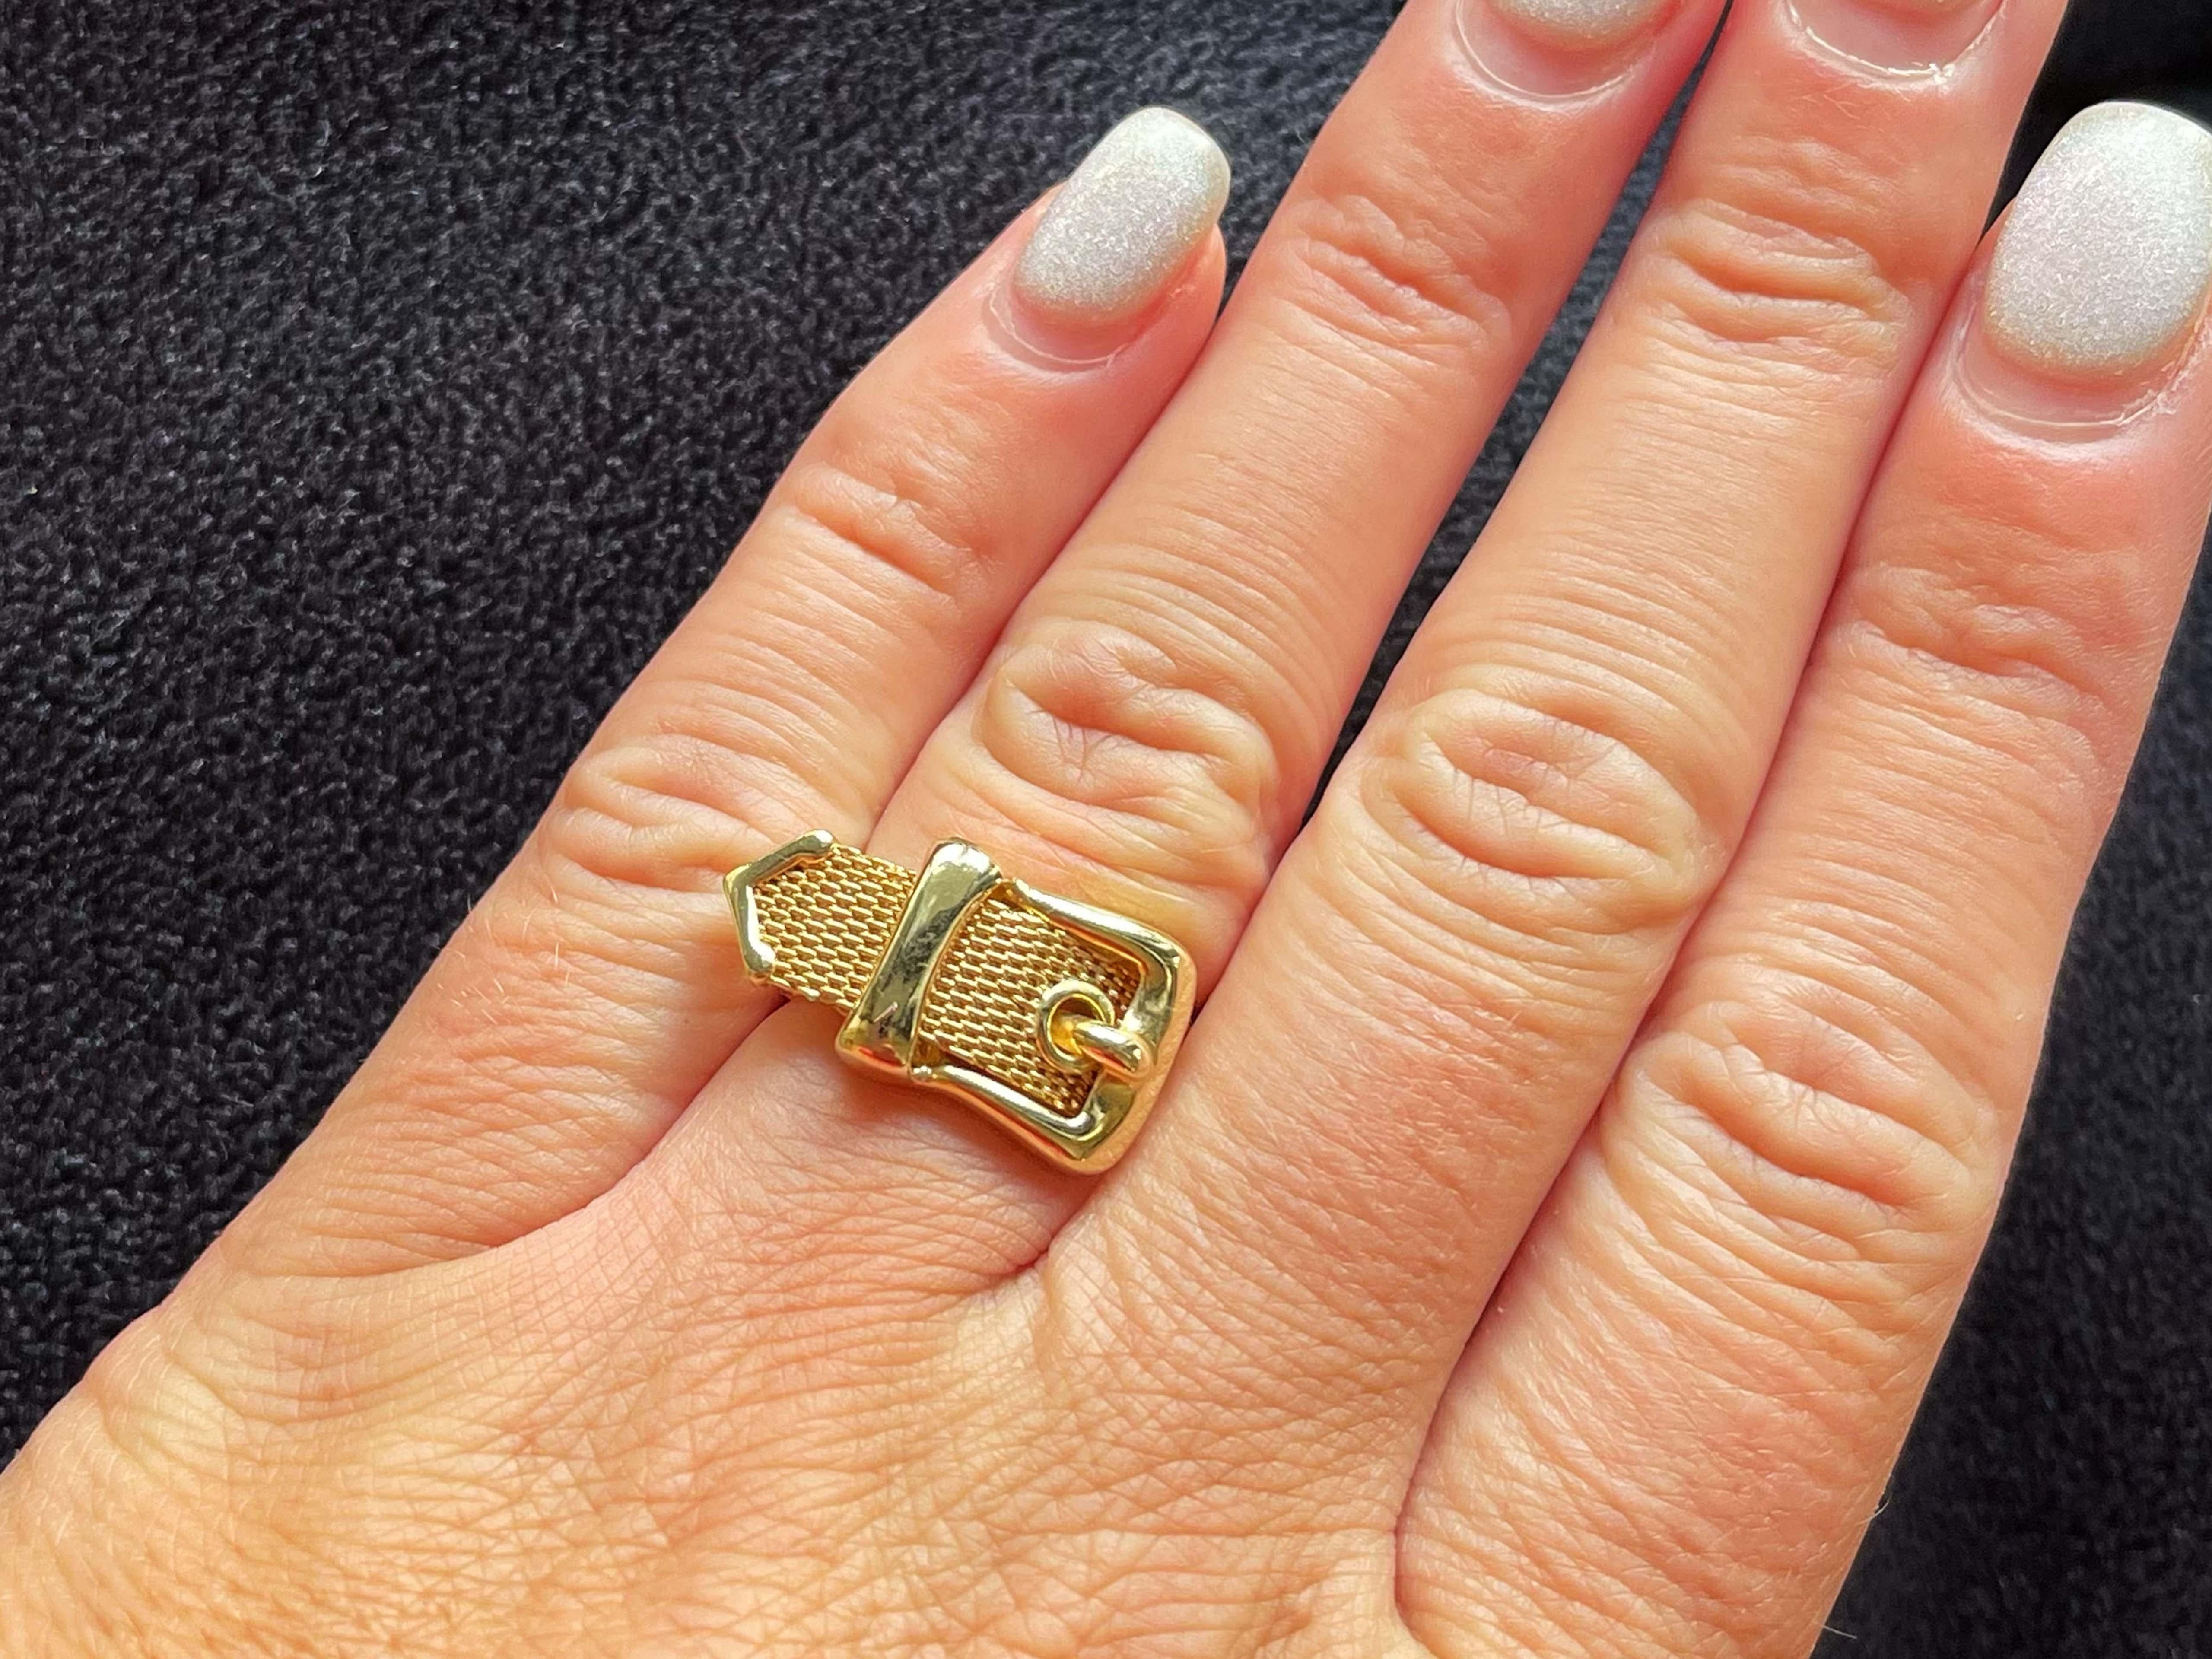 Item Specifications:

Metal: 14K Yellow Gold

Style: Statement Ring

Ring Size: 6.25 (resizing available for a fee)

Total Weight: 5.8 Grams

Condition: Preowned, excellent
​
​Stamped: 